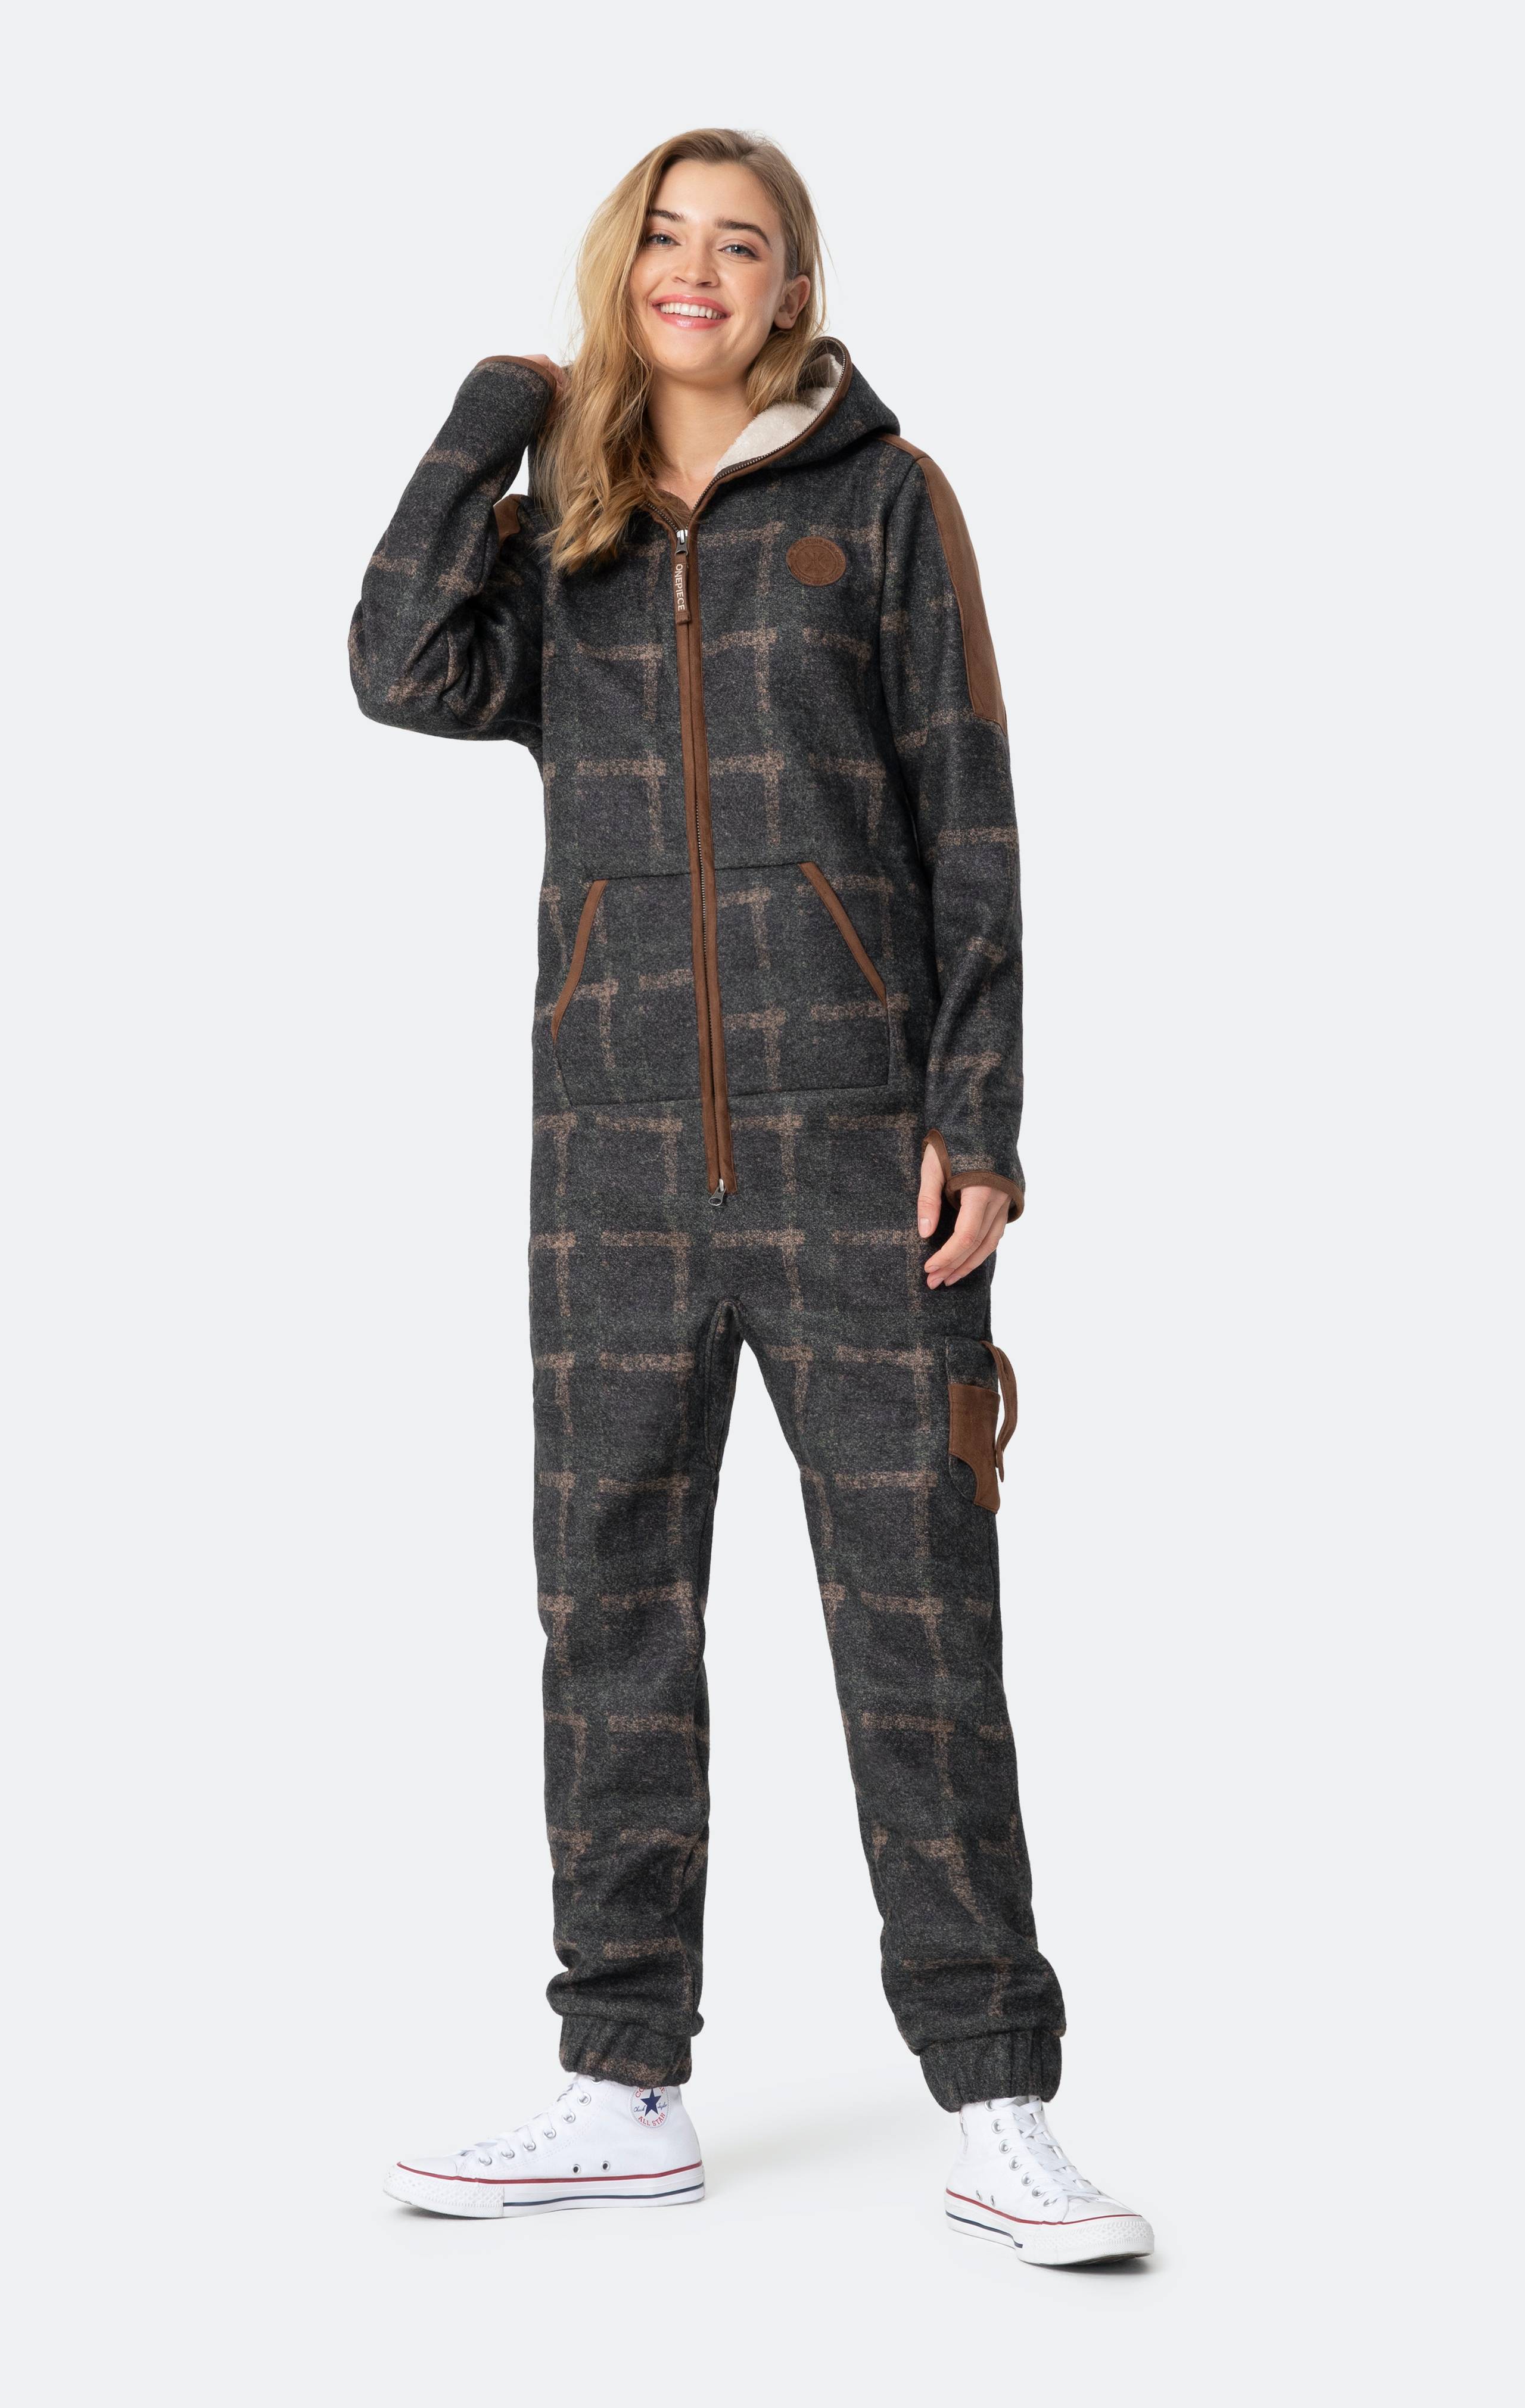 Onepiece Good Chill Hunting Jumpsuit Green - 5